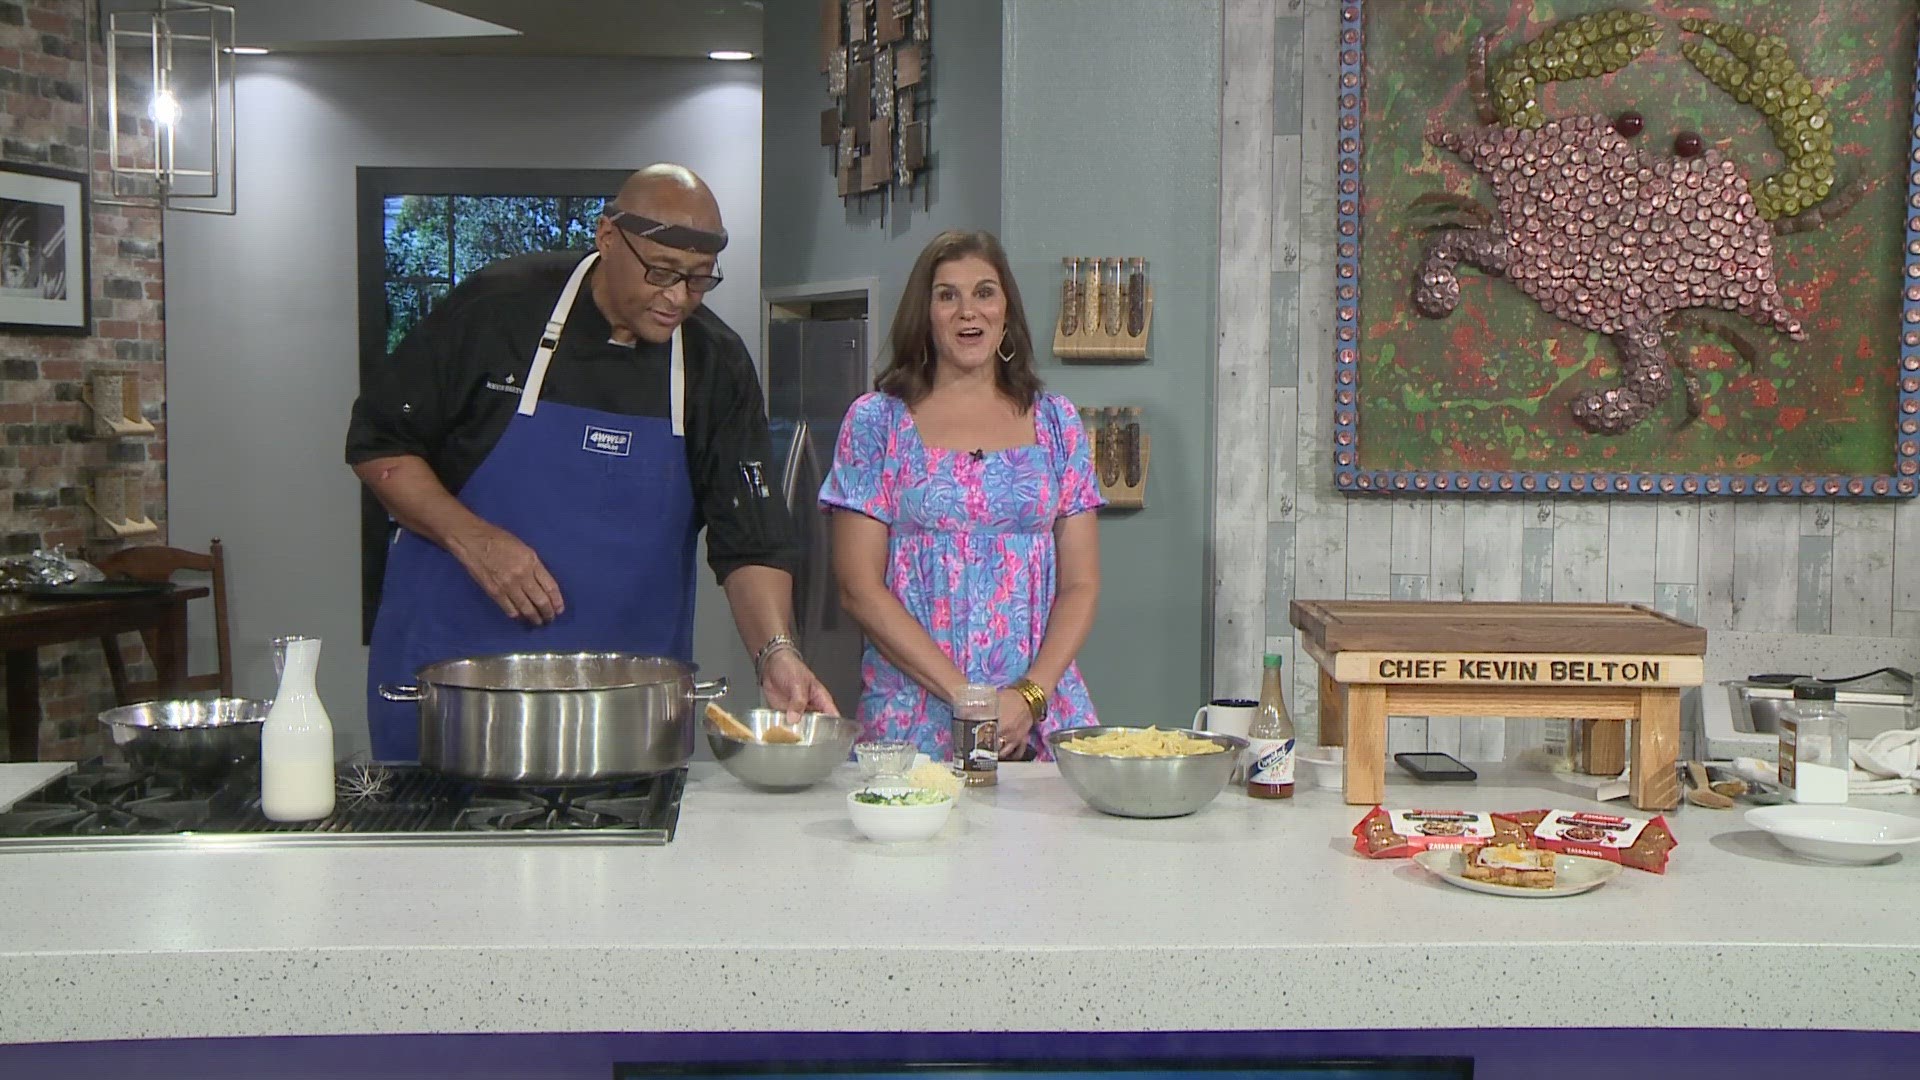 Chef Kevin Belton is making a Sensational Sausage Pastry and Creamy Creole Sausage Pasta.